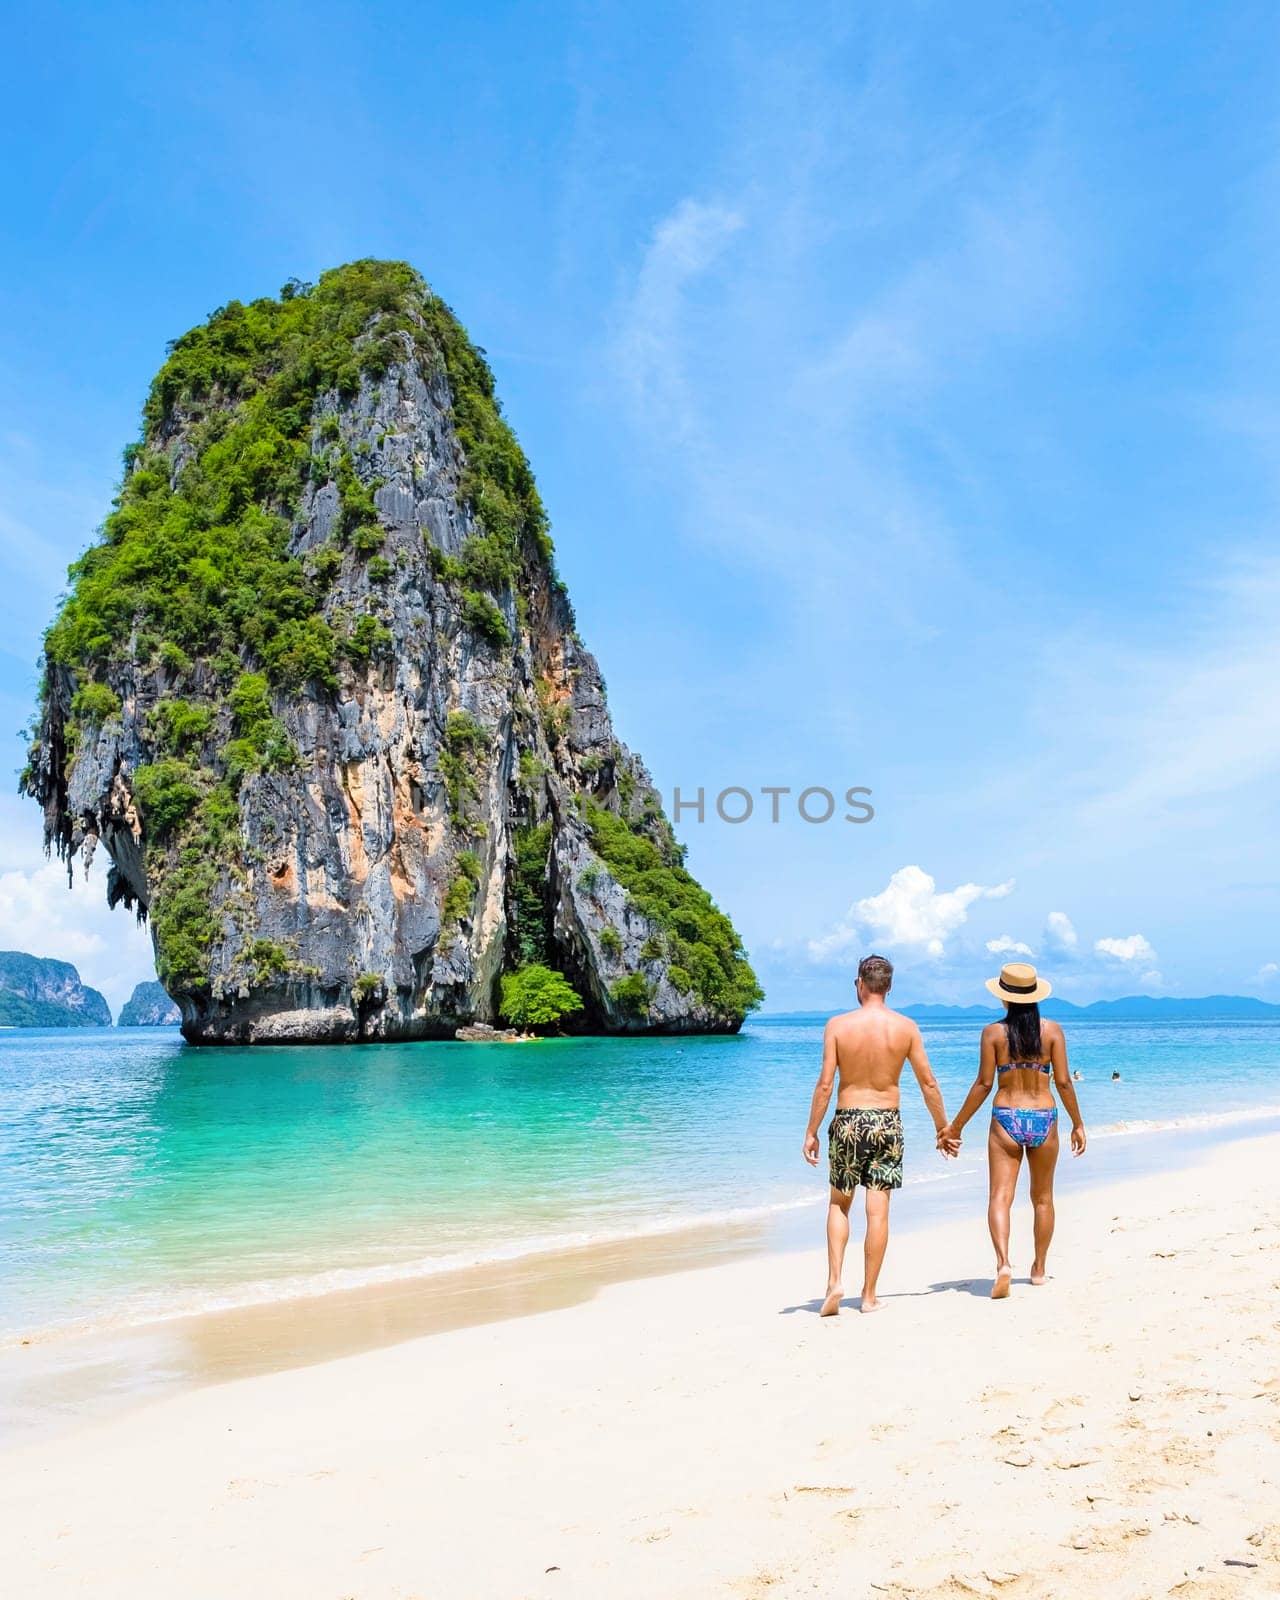 diverse couple of men and women on the beach of Railay Krabi Thailand, an Asian woman in a bikini and a Caucasian man in swim short walking at the beach with a huge limestone cliff in the background